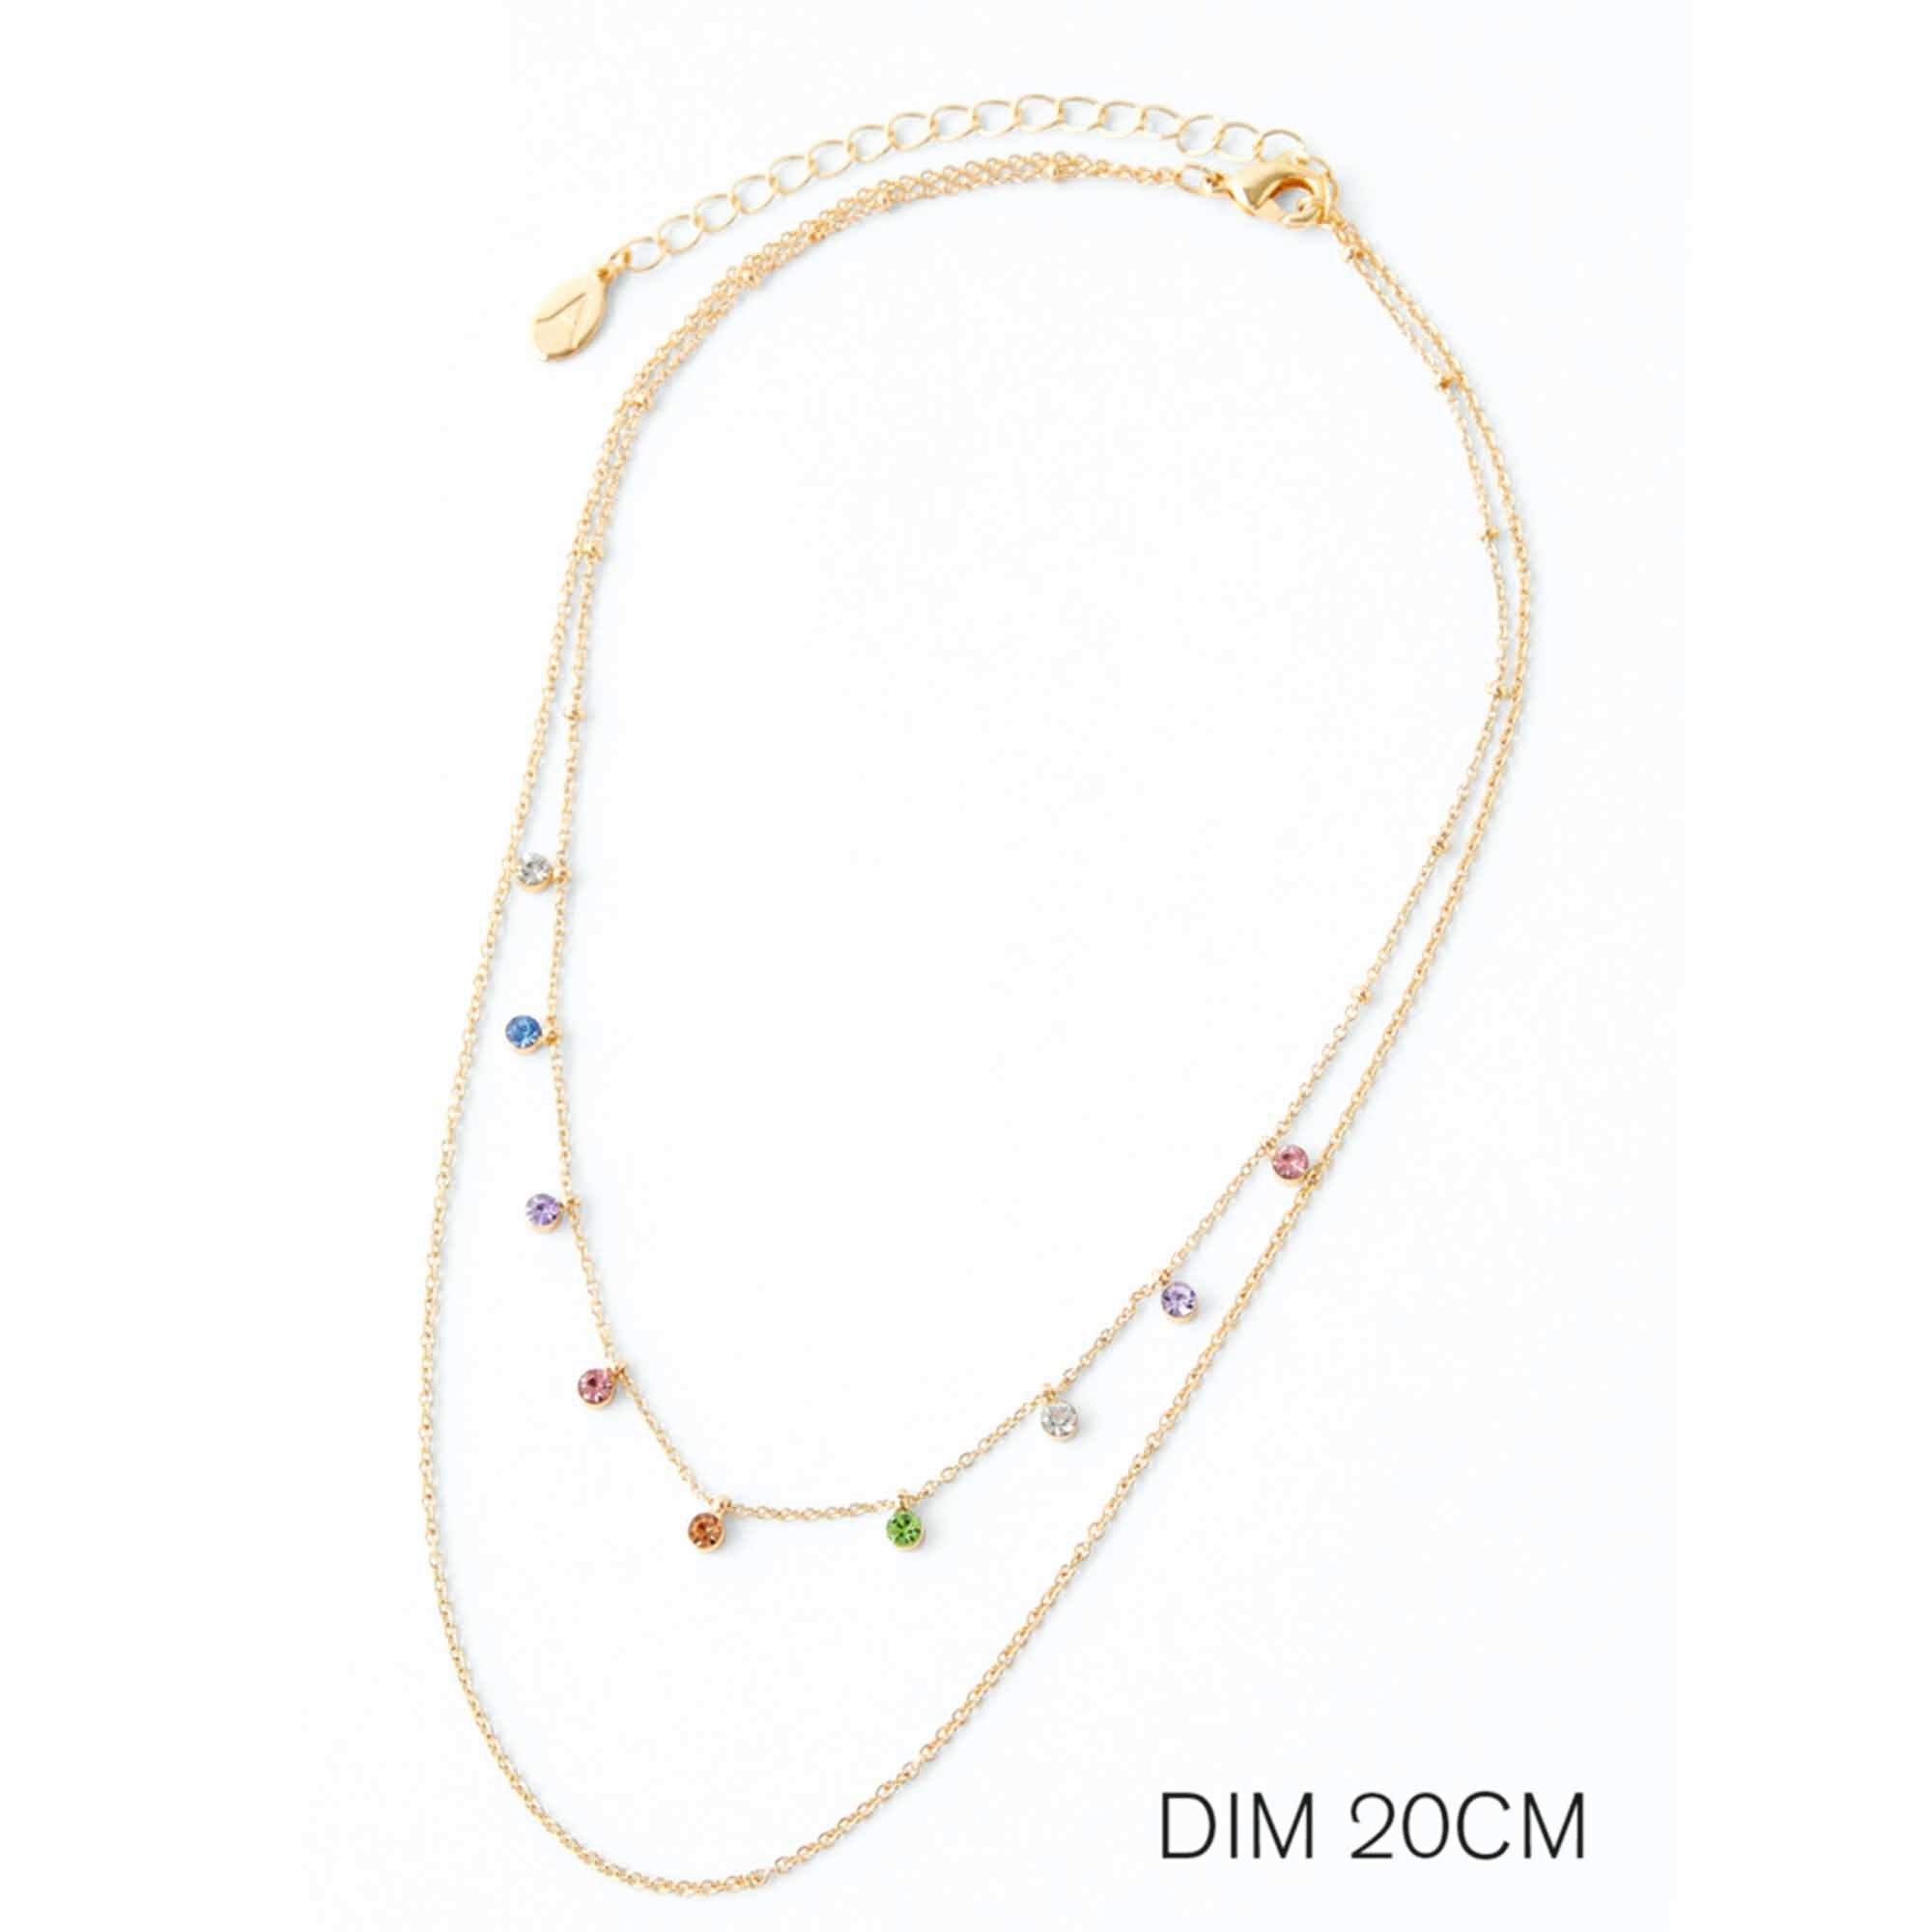 Accessorize London Ombre Droplets Dainty Multirow